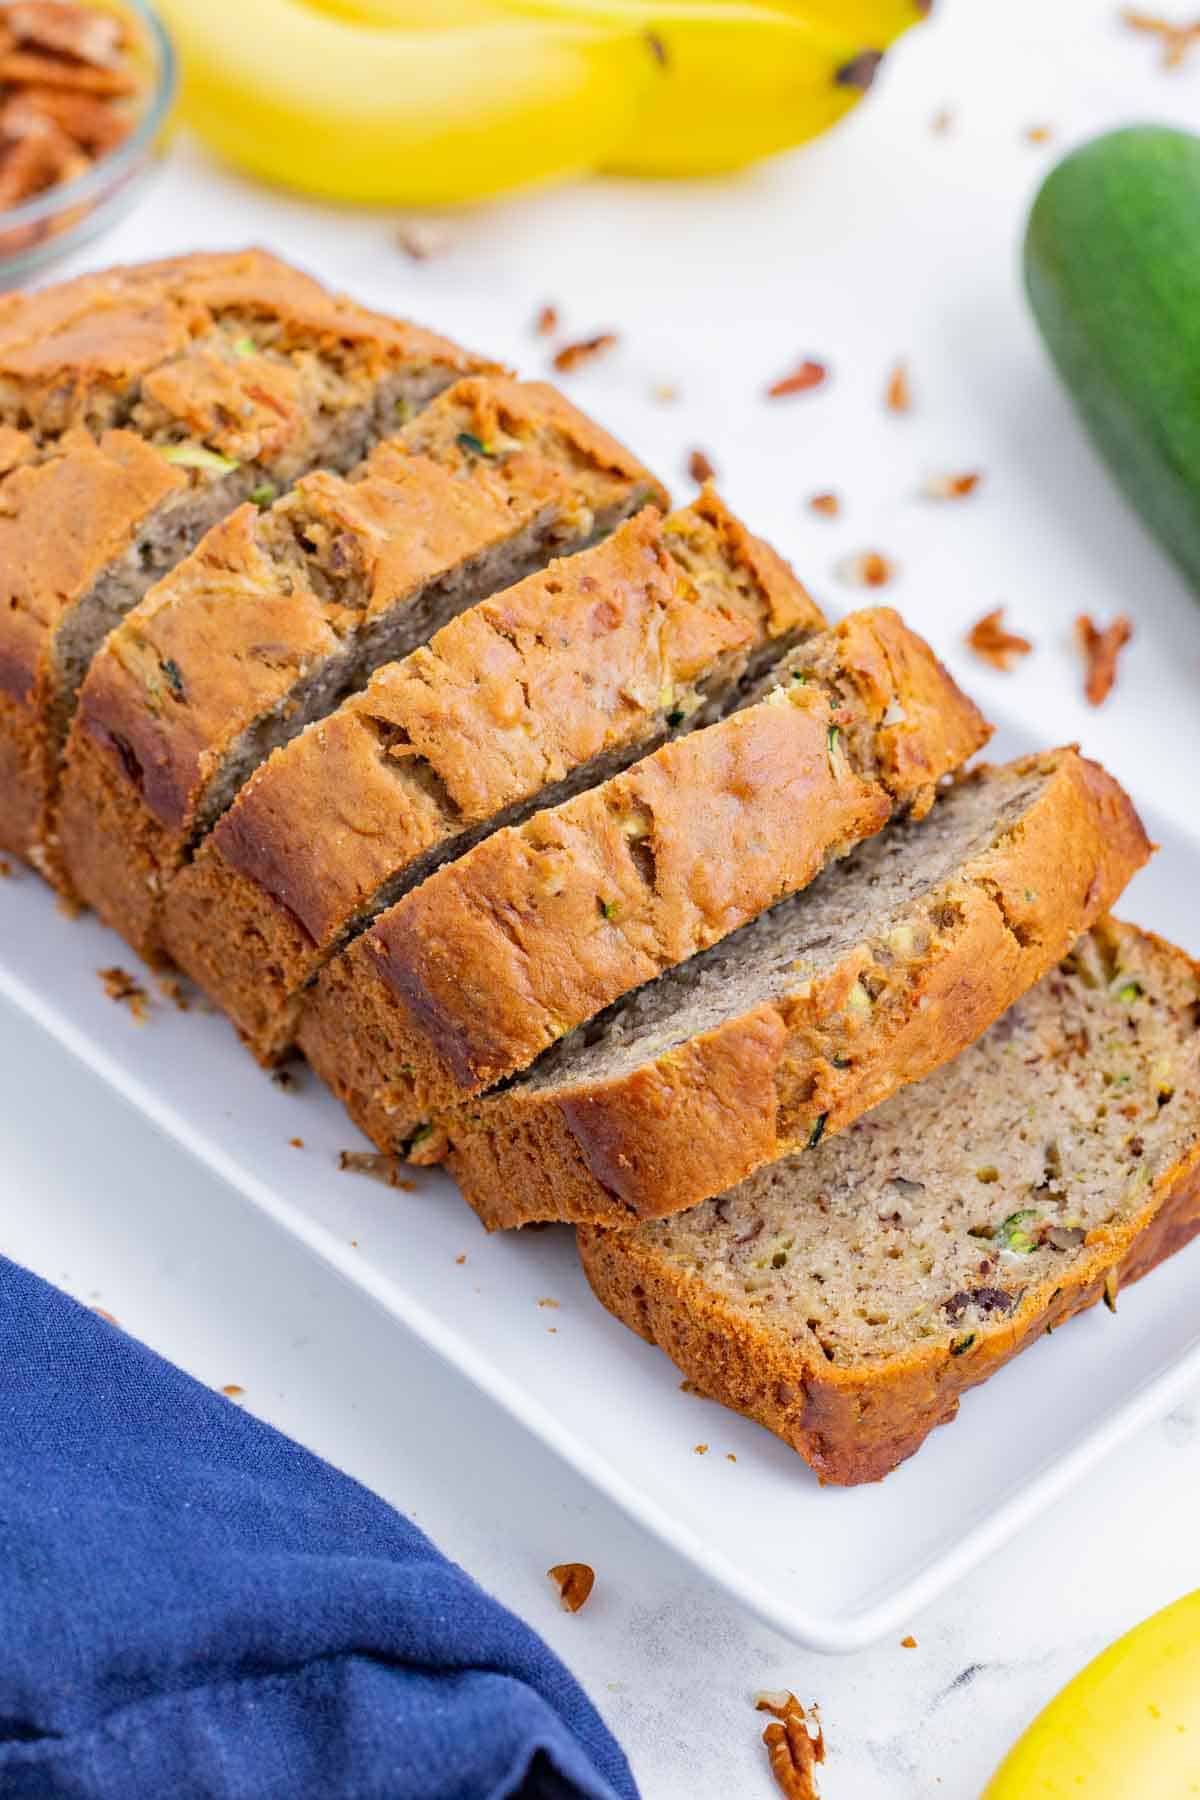 Zucchini banana bread is rich and moist because of its ingredients.